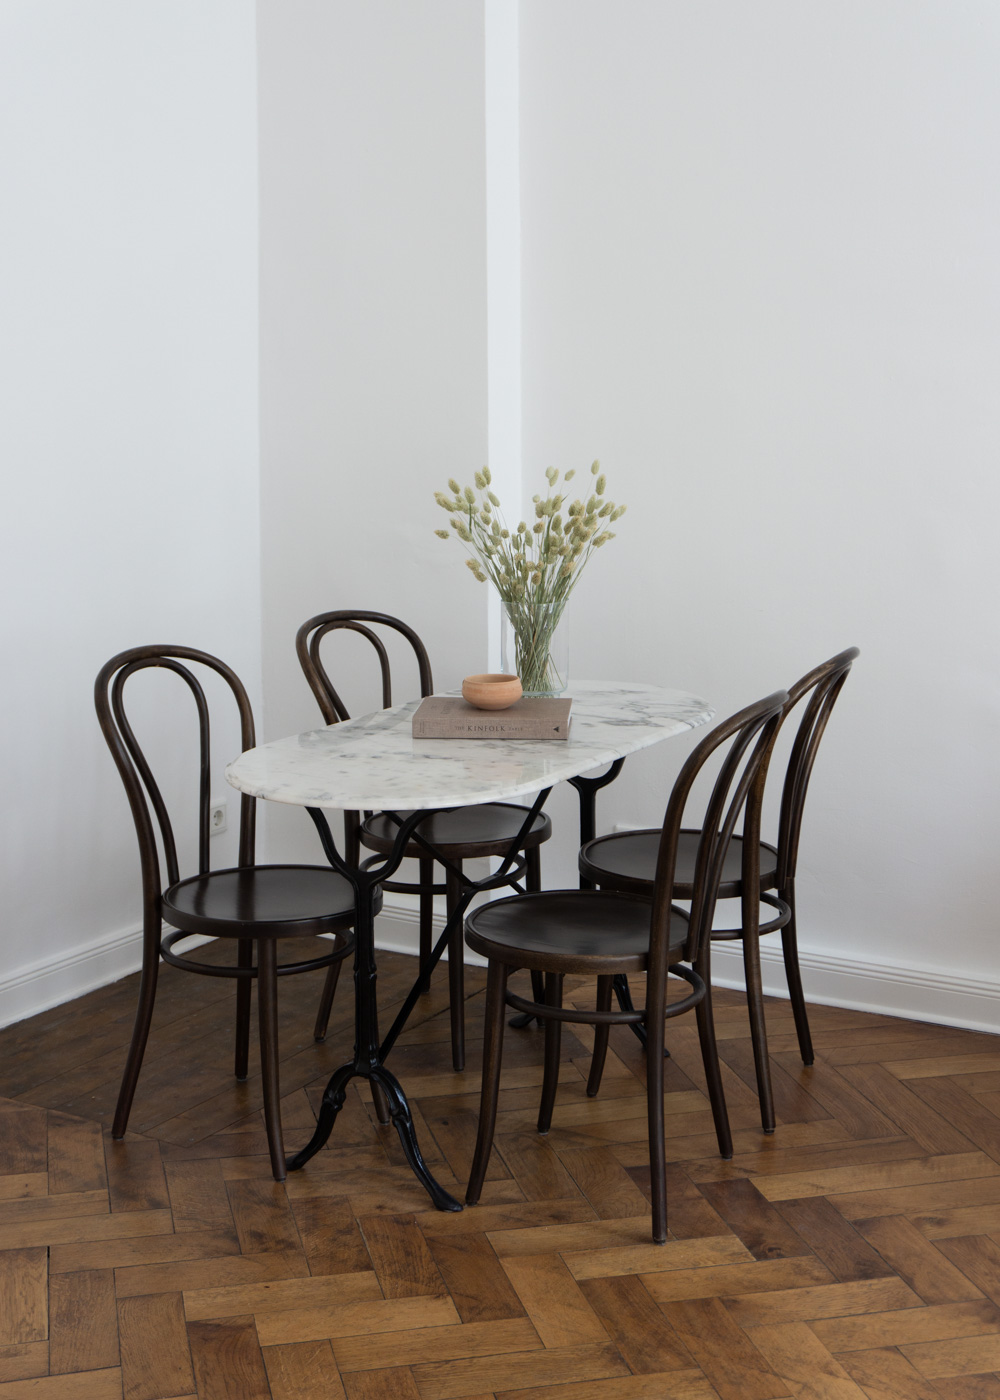 Thonet Chairs | neutral interior, white and beige home, wood floors, minimalist simple decor, natural berlin apartment, scandinavian design, calm aesthetic